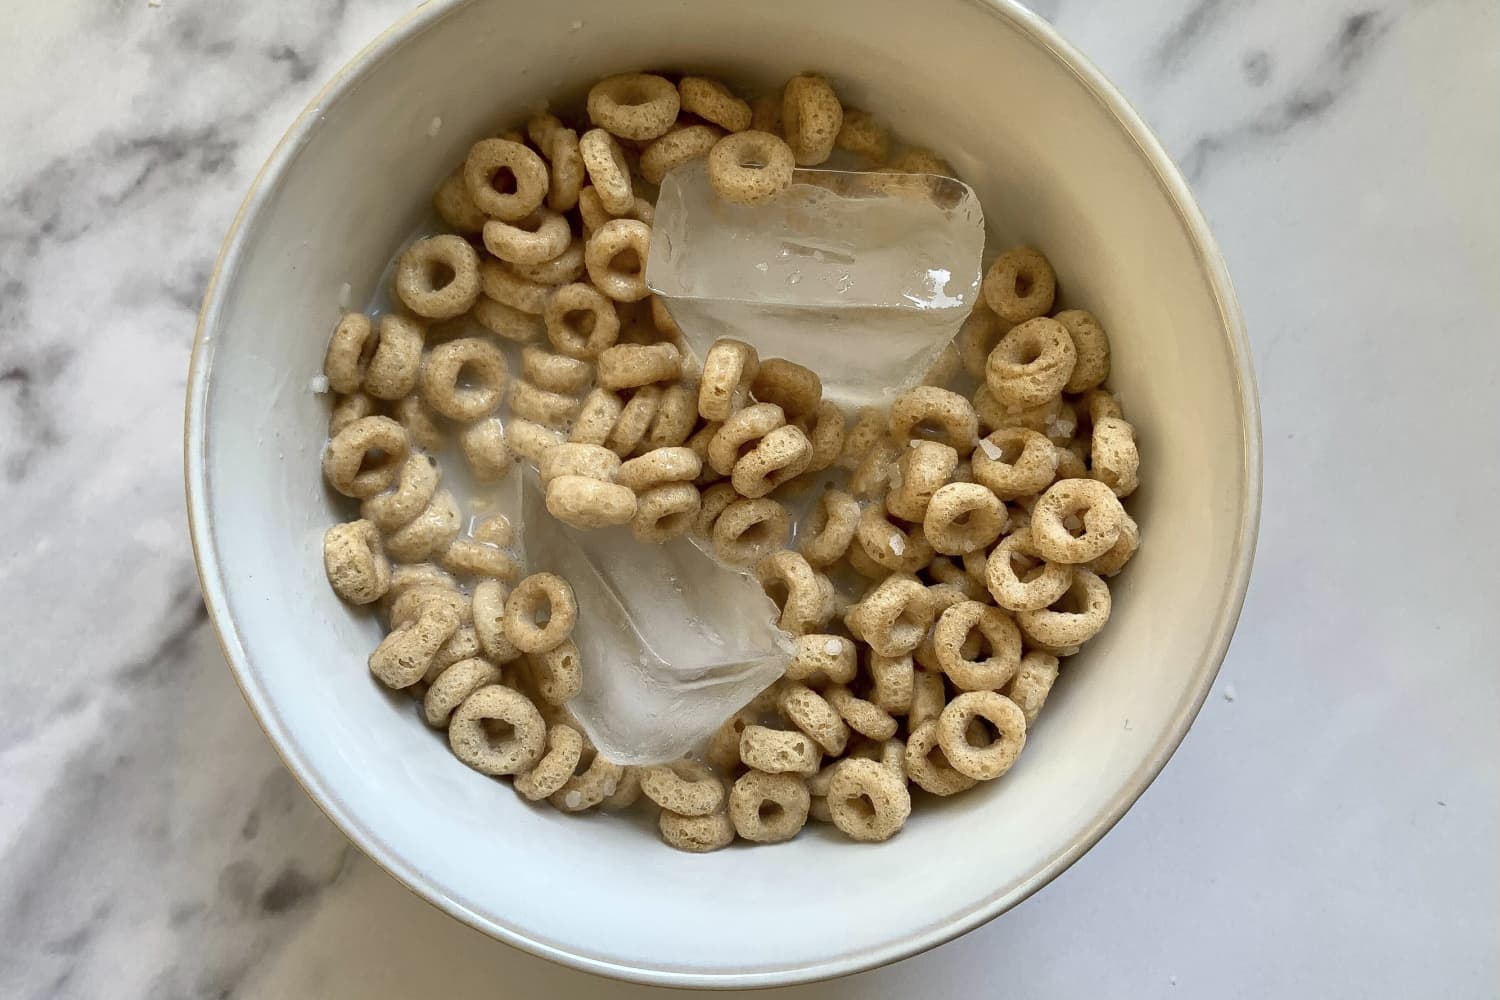 Why I'll Never Eat a Bowl of Cereal Without Ice Again (Trust Me on This)